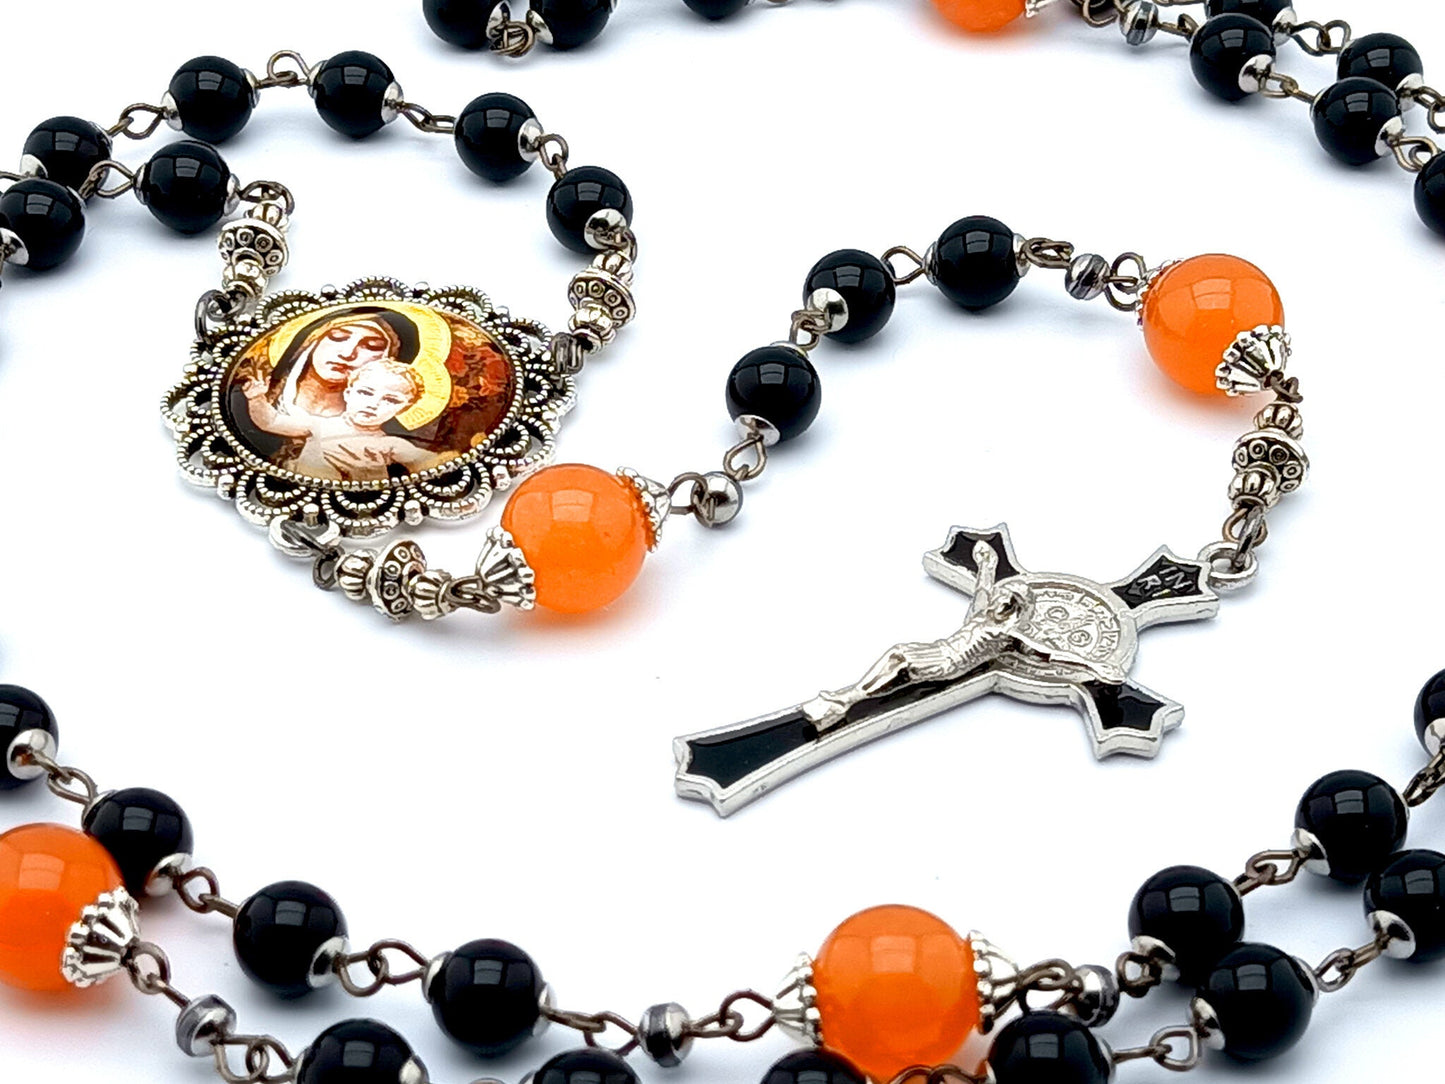 Our Lady of Laus unique rosary beads with black onyx gemstone and tangerine glass beads, black enamel crucifix and silver picture centre medal.